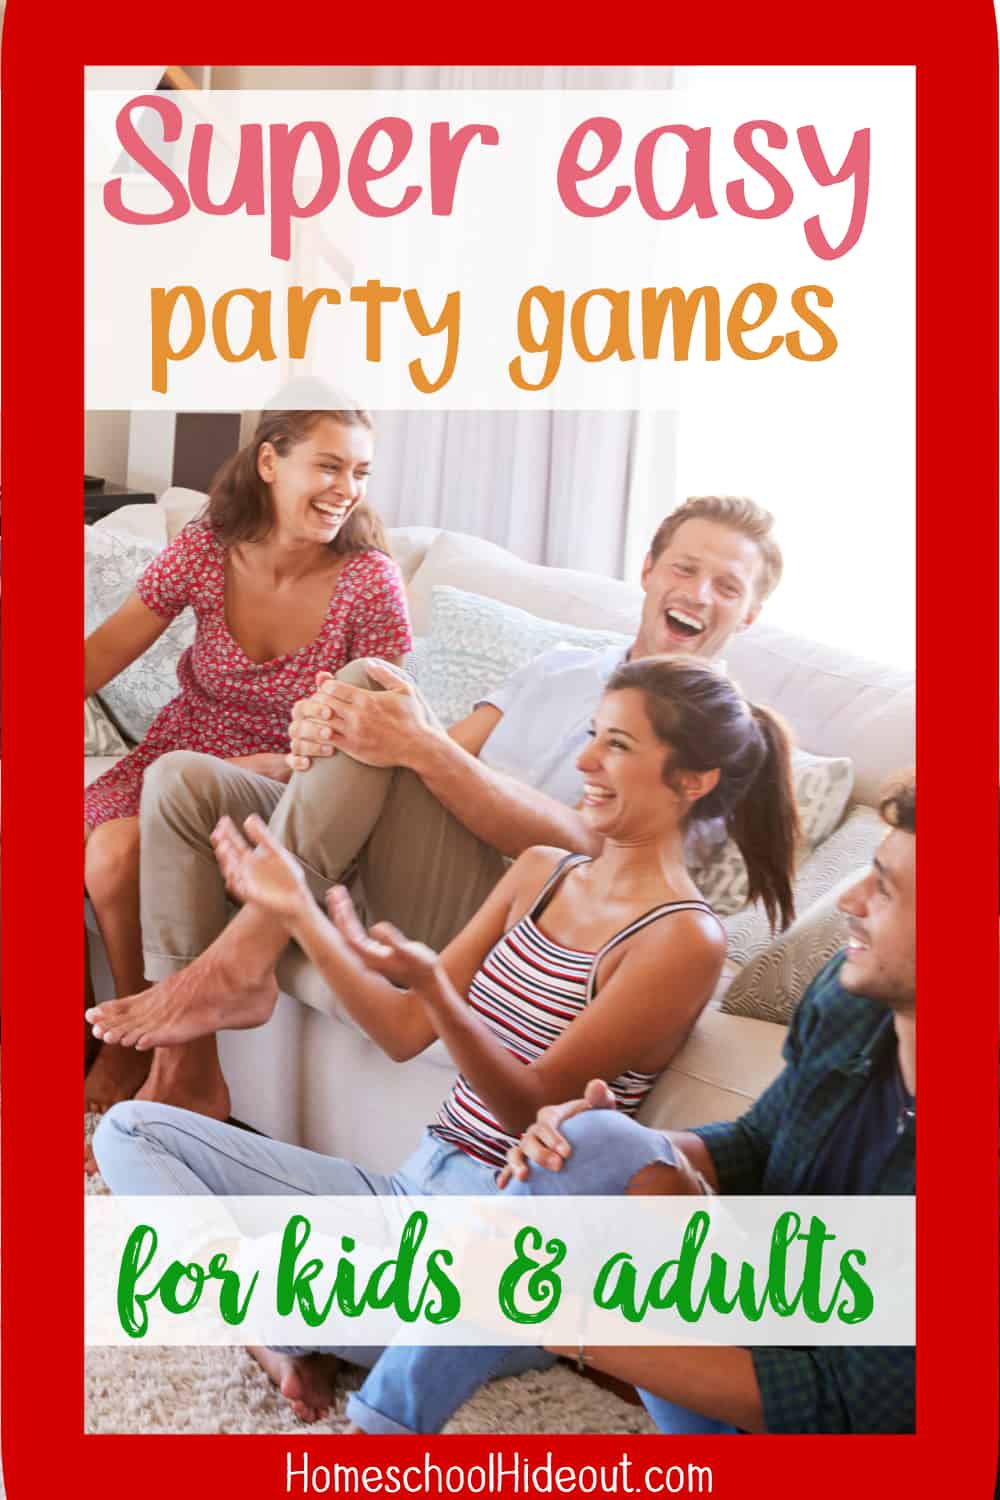 These party games for kids and adults are quick, easy and sure to be a hit with all ages! I especially love #2 and always play it at our parties.